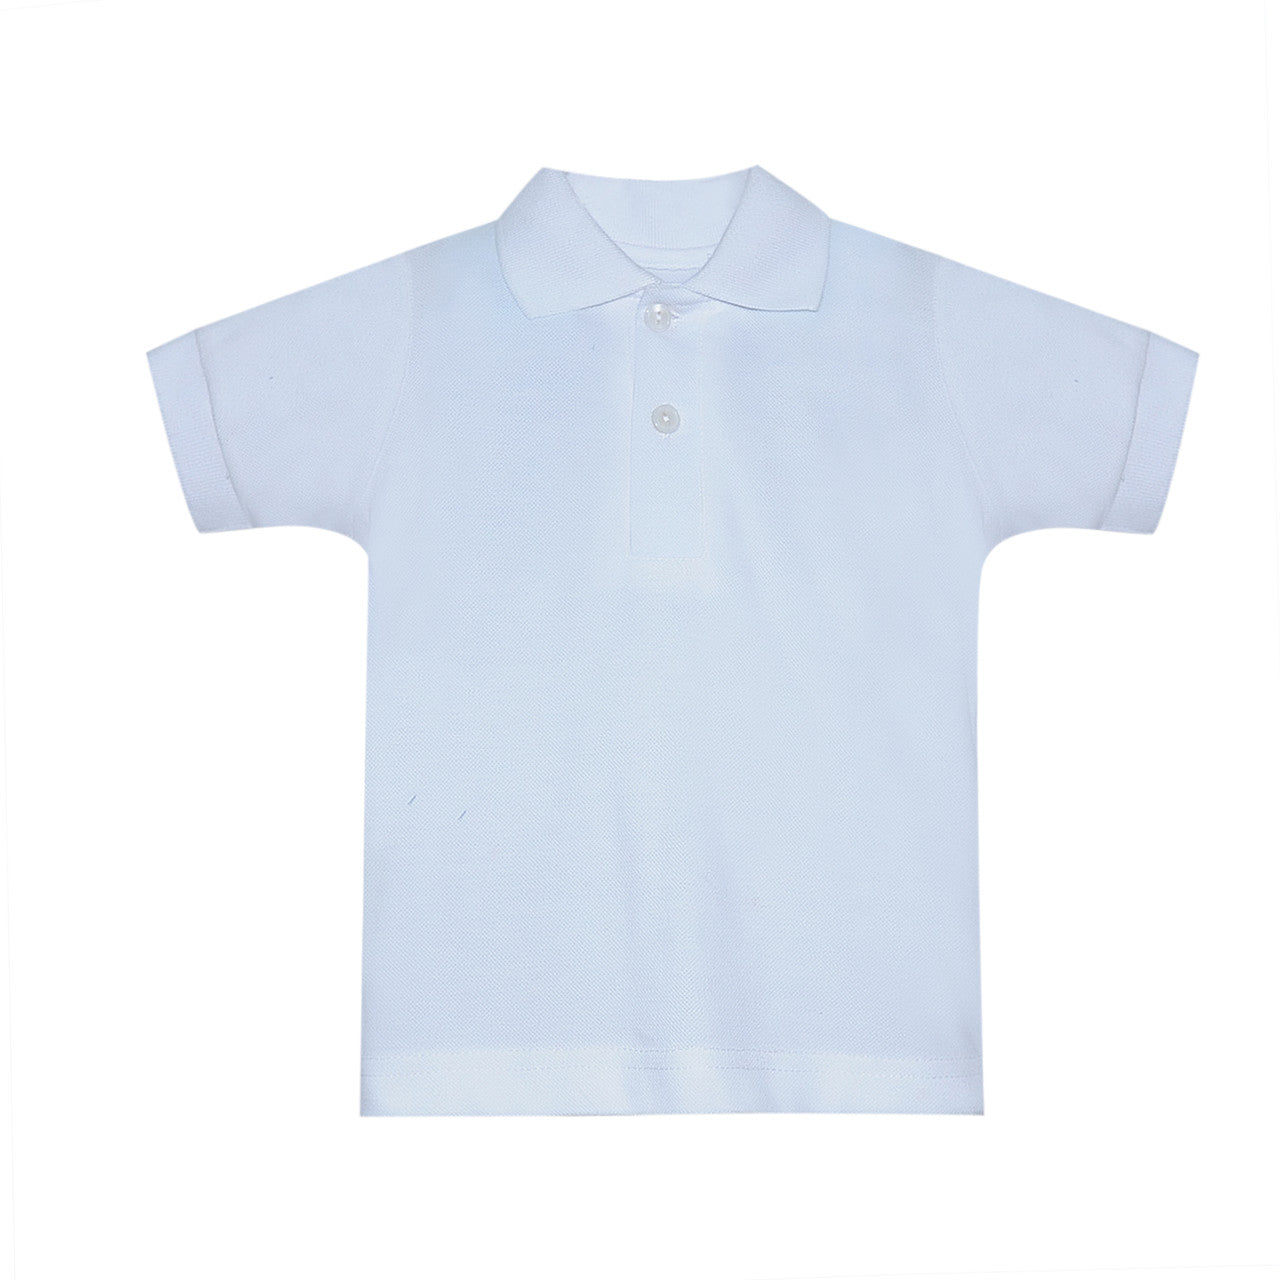 The Azarhia Sophisticated White Polo Shirt, a timeless classic of style and sophistication, showcased on a white background.